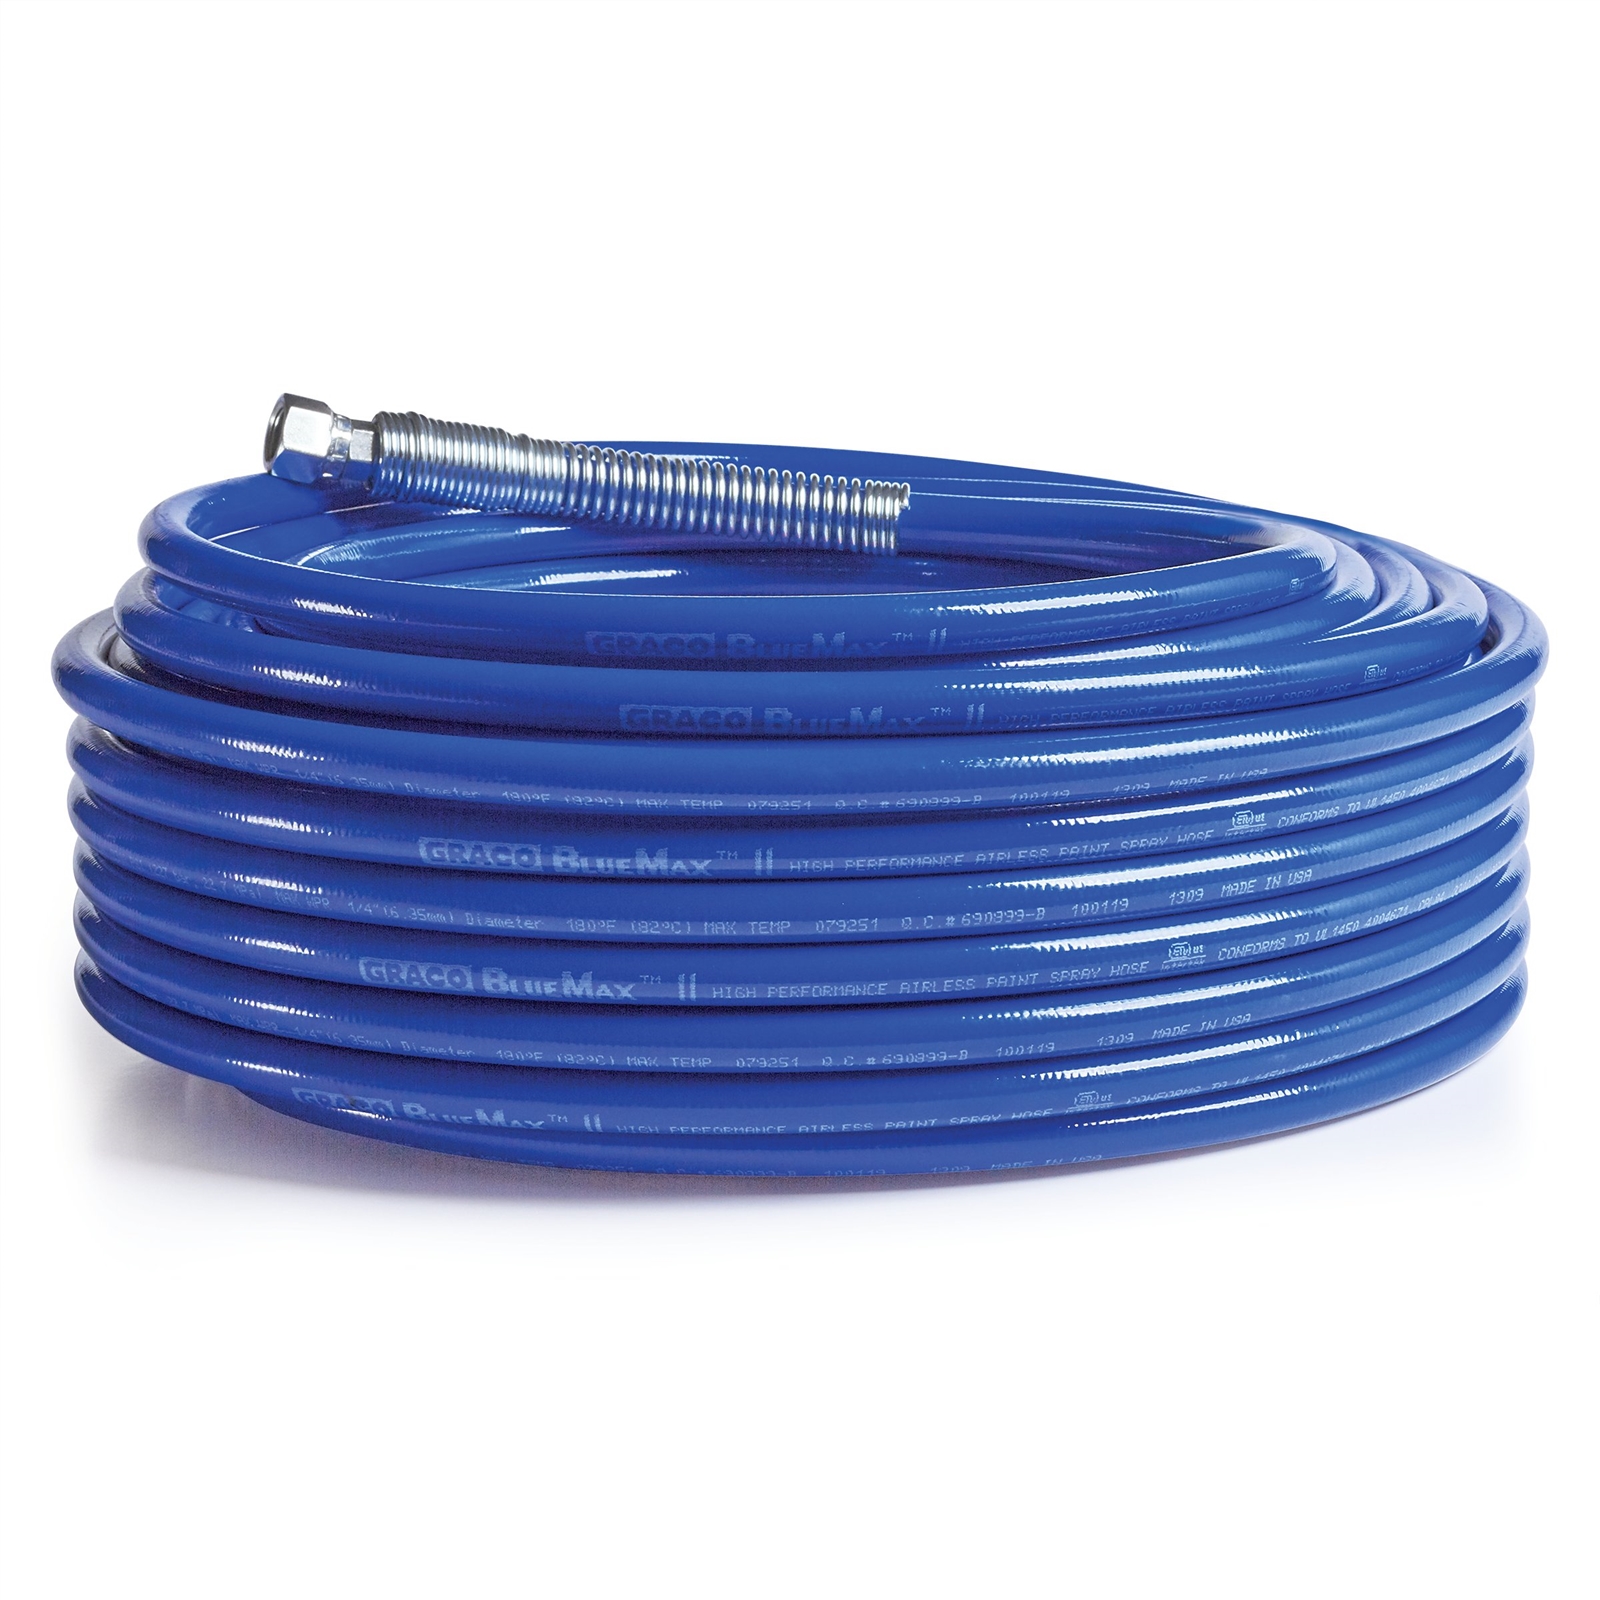 Hose Bumper for 11/16" ID x 1-3/8" OD Hose for GRACO & Many Other Applications 